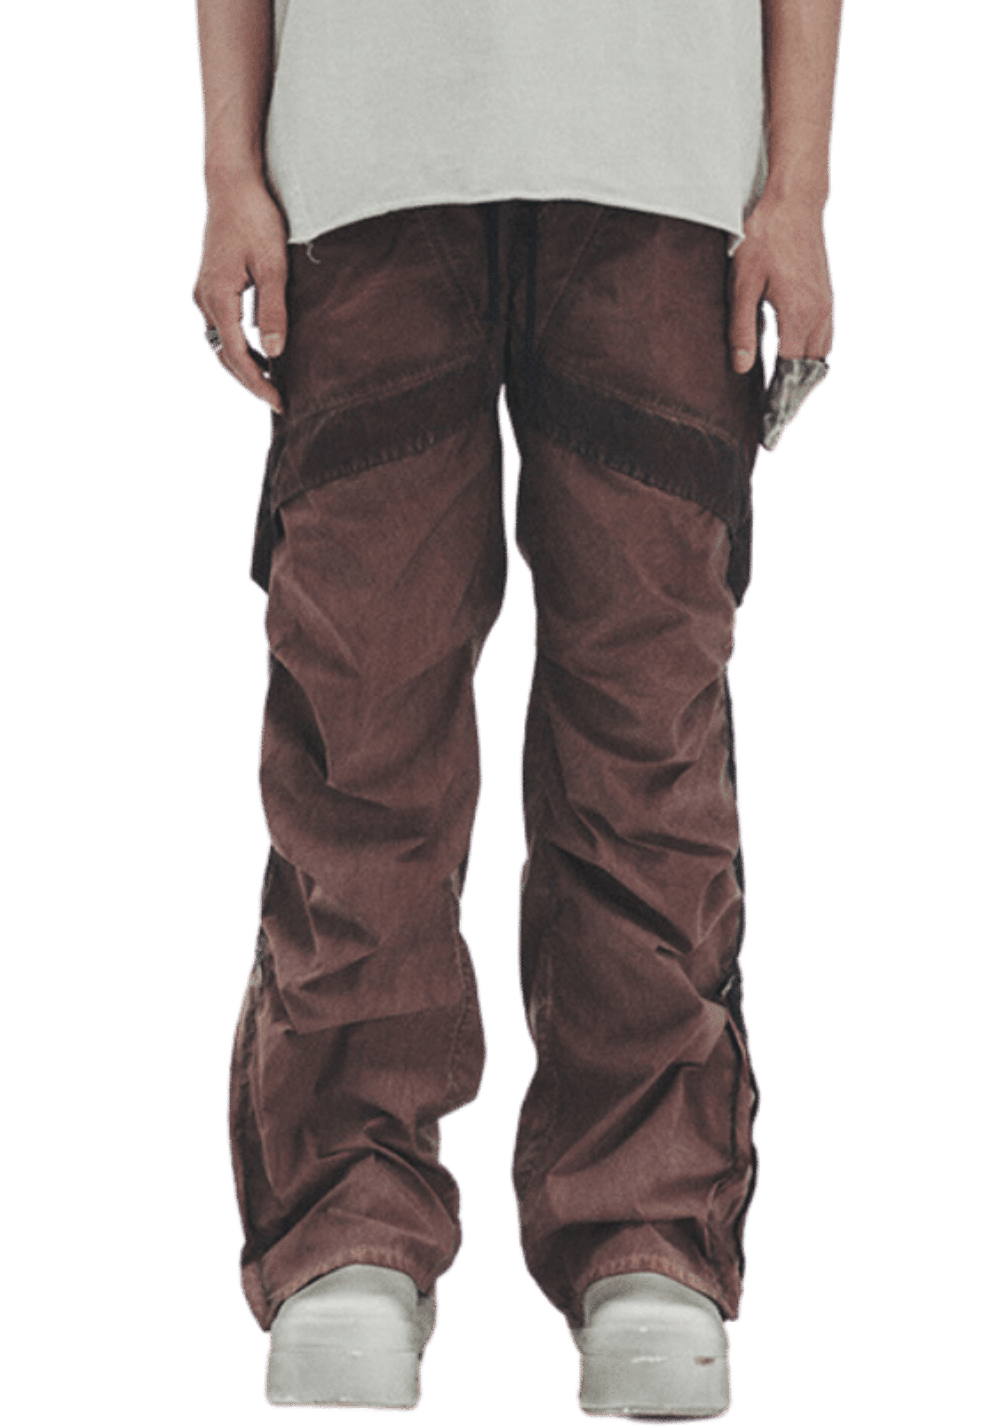 Multi-Structured 3D Lightweight Trousers - PSYLOS 1, Multi-Structured 3D Lightweight Trousers, Pants, D5ove, PSYLOS 1